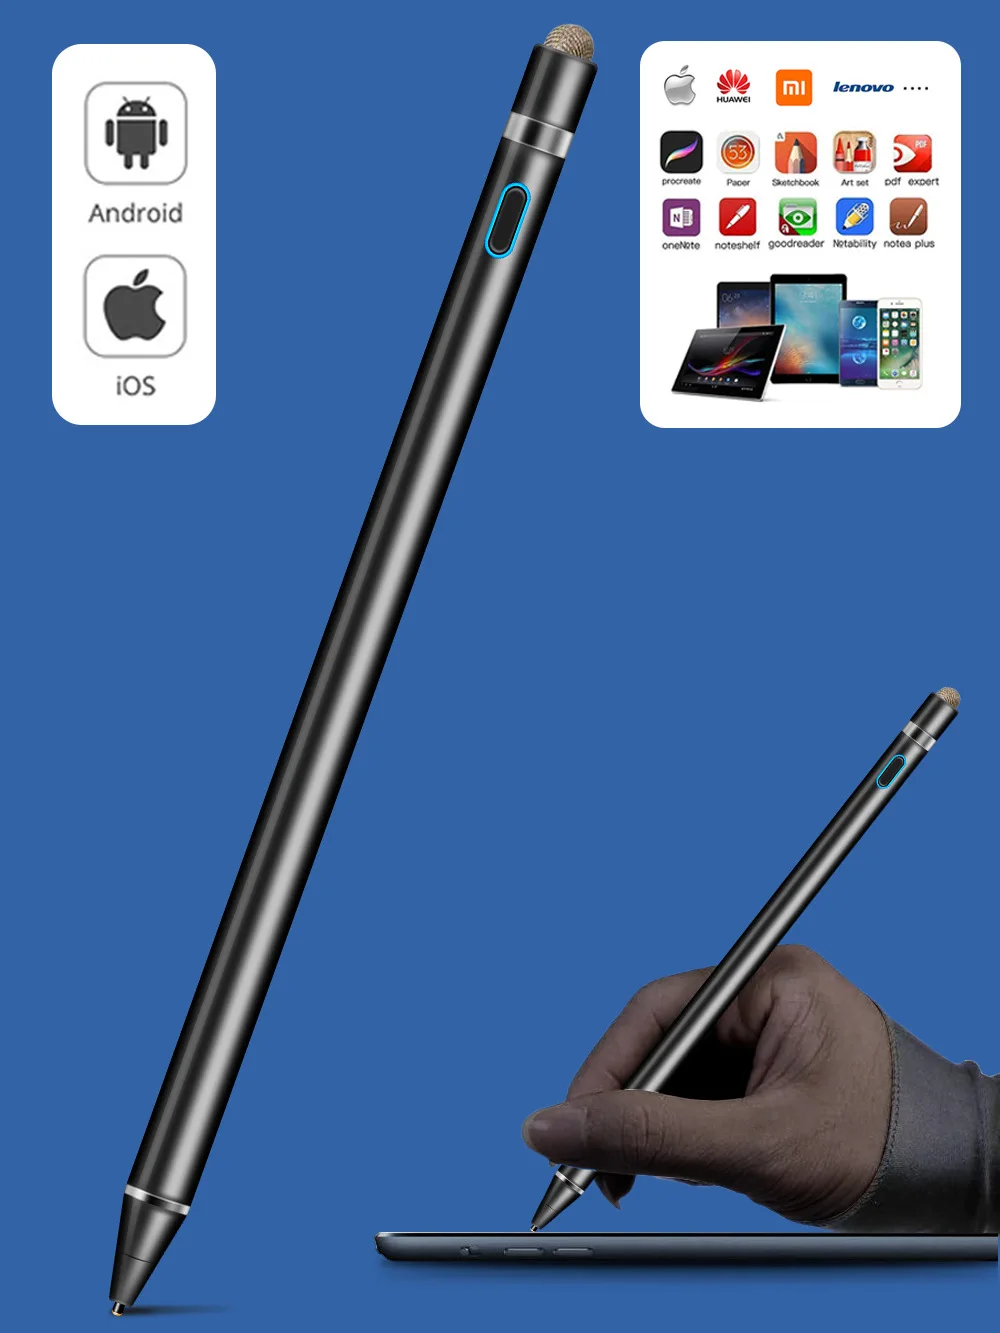 

Active Stylus Digital Pen for Drawing and Handwriting on Touch Screen Smartphones & Tablets (iOS/Android) (2 in 1)